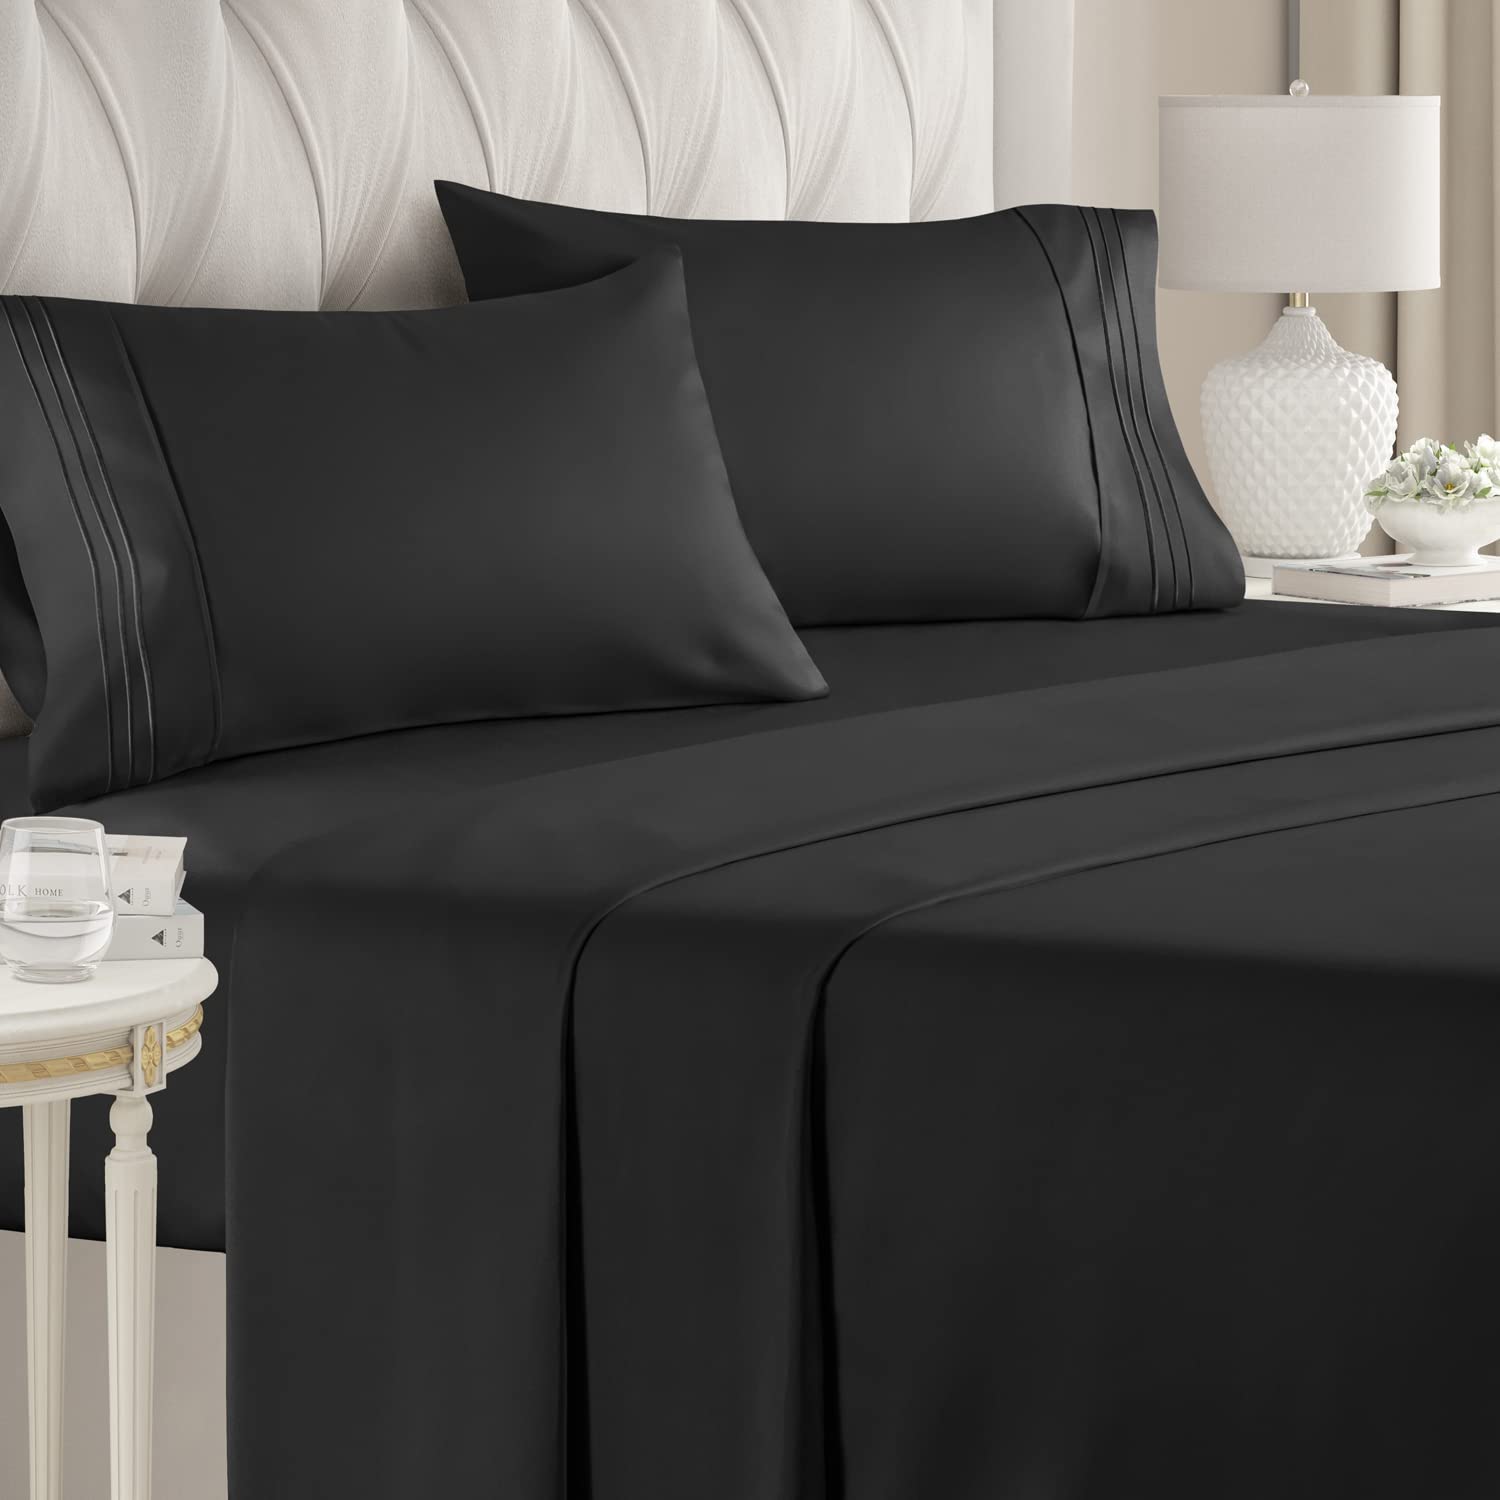 Queen Size Sheet Set - Breathable & Cooling Sheets - Softer than Jersey Cotton - Same Look as Jersey Knit Sheets & T-Shirt Sheets - Deep Pockets - 4 Piece Set - Wrinkle Free - Heathered Tan – 4PC